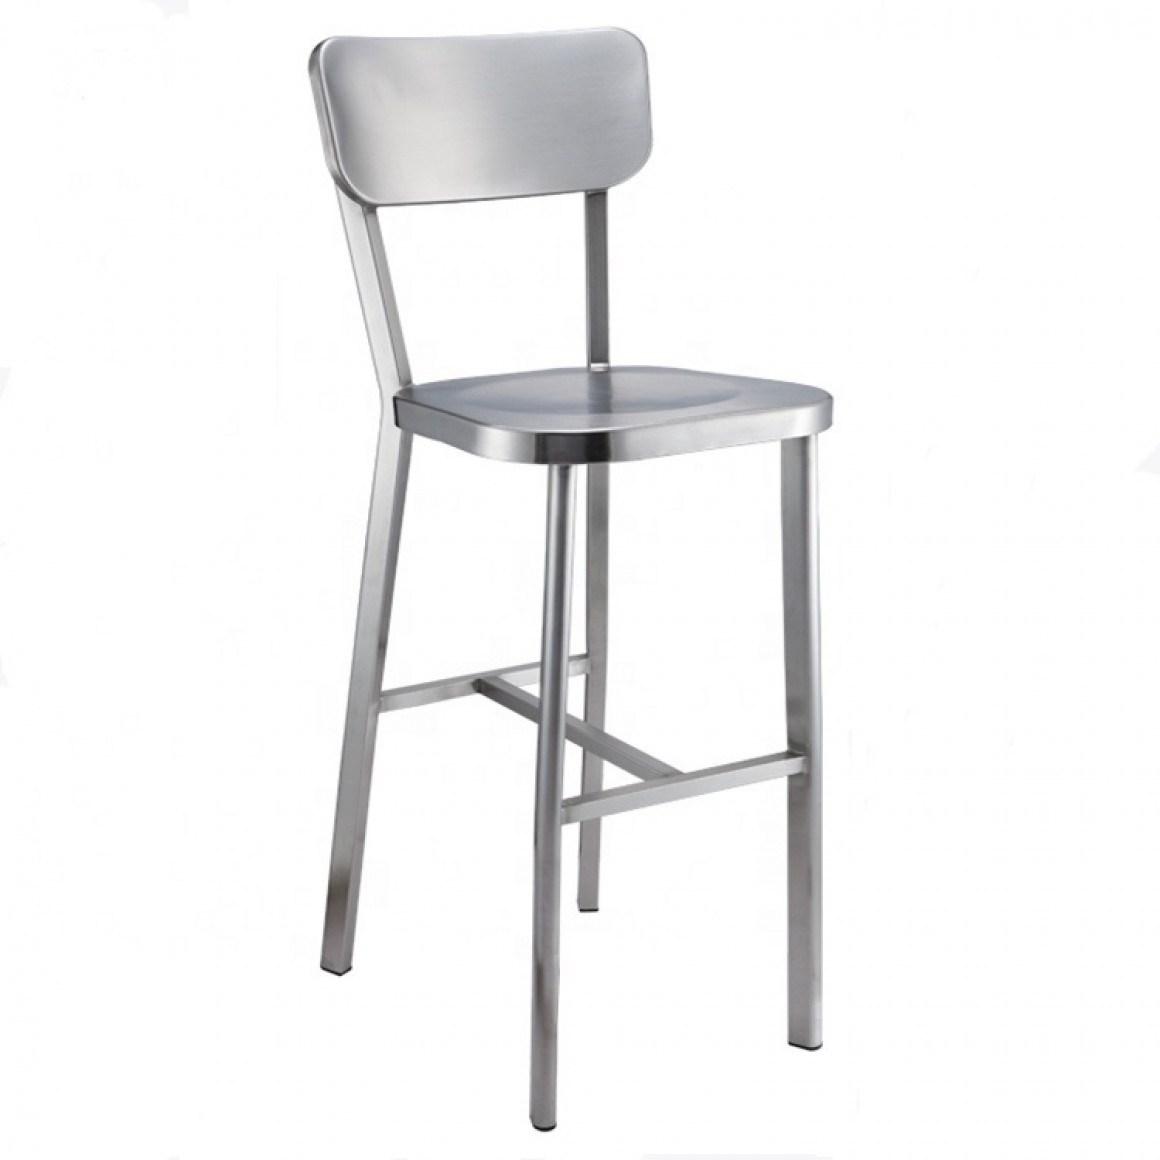 Bar chair,201 stainless steel